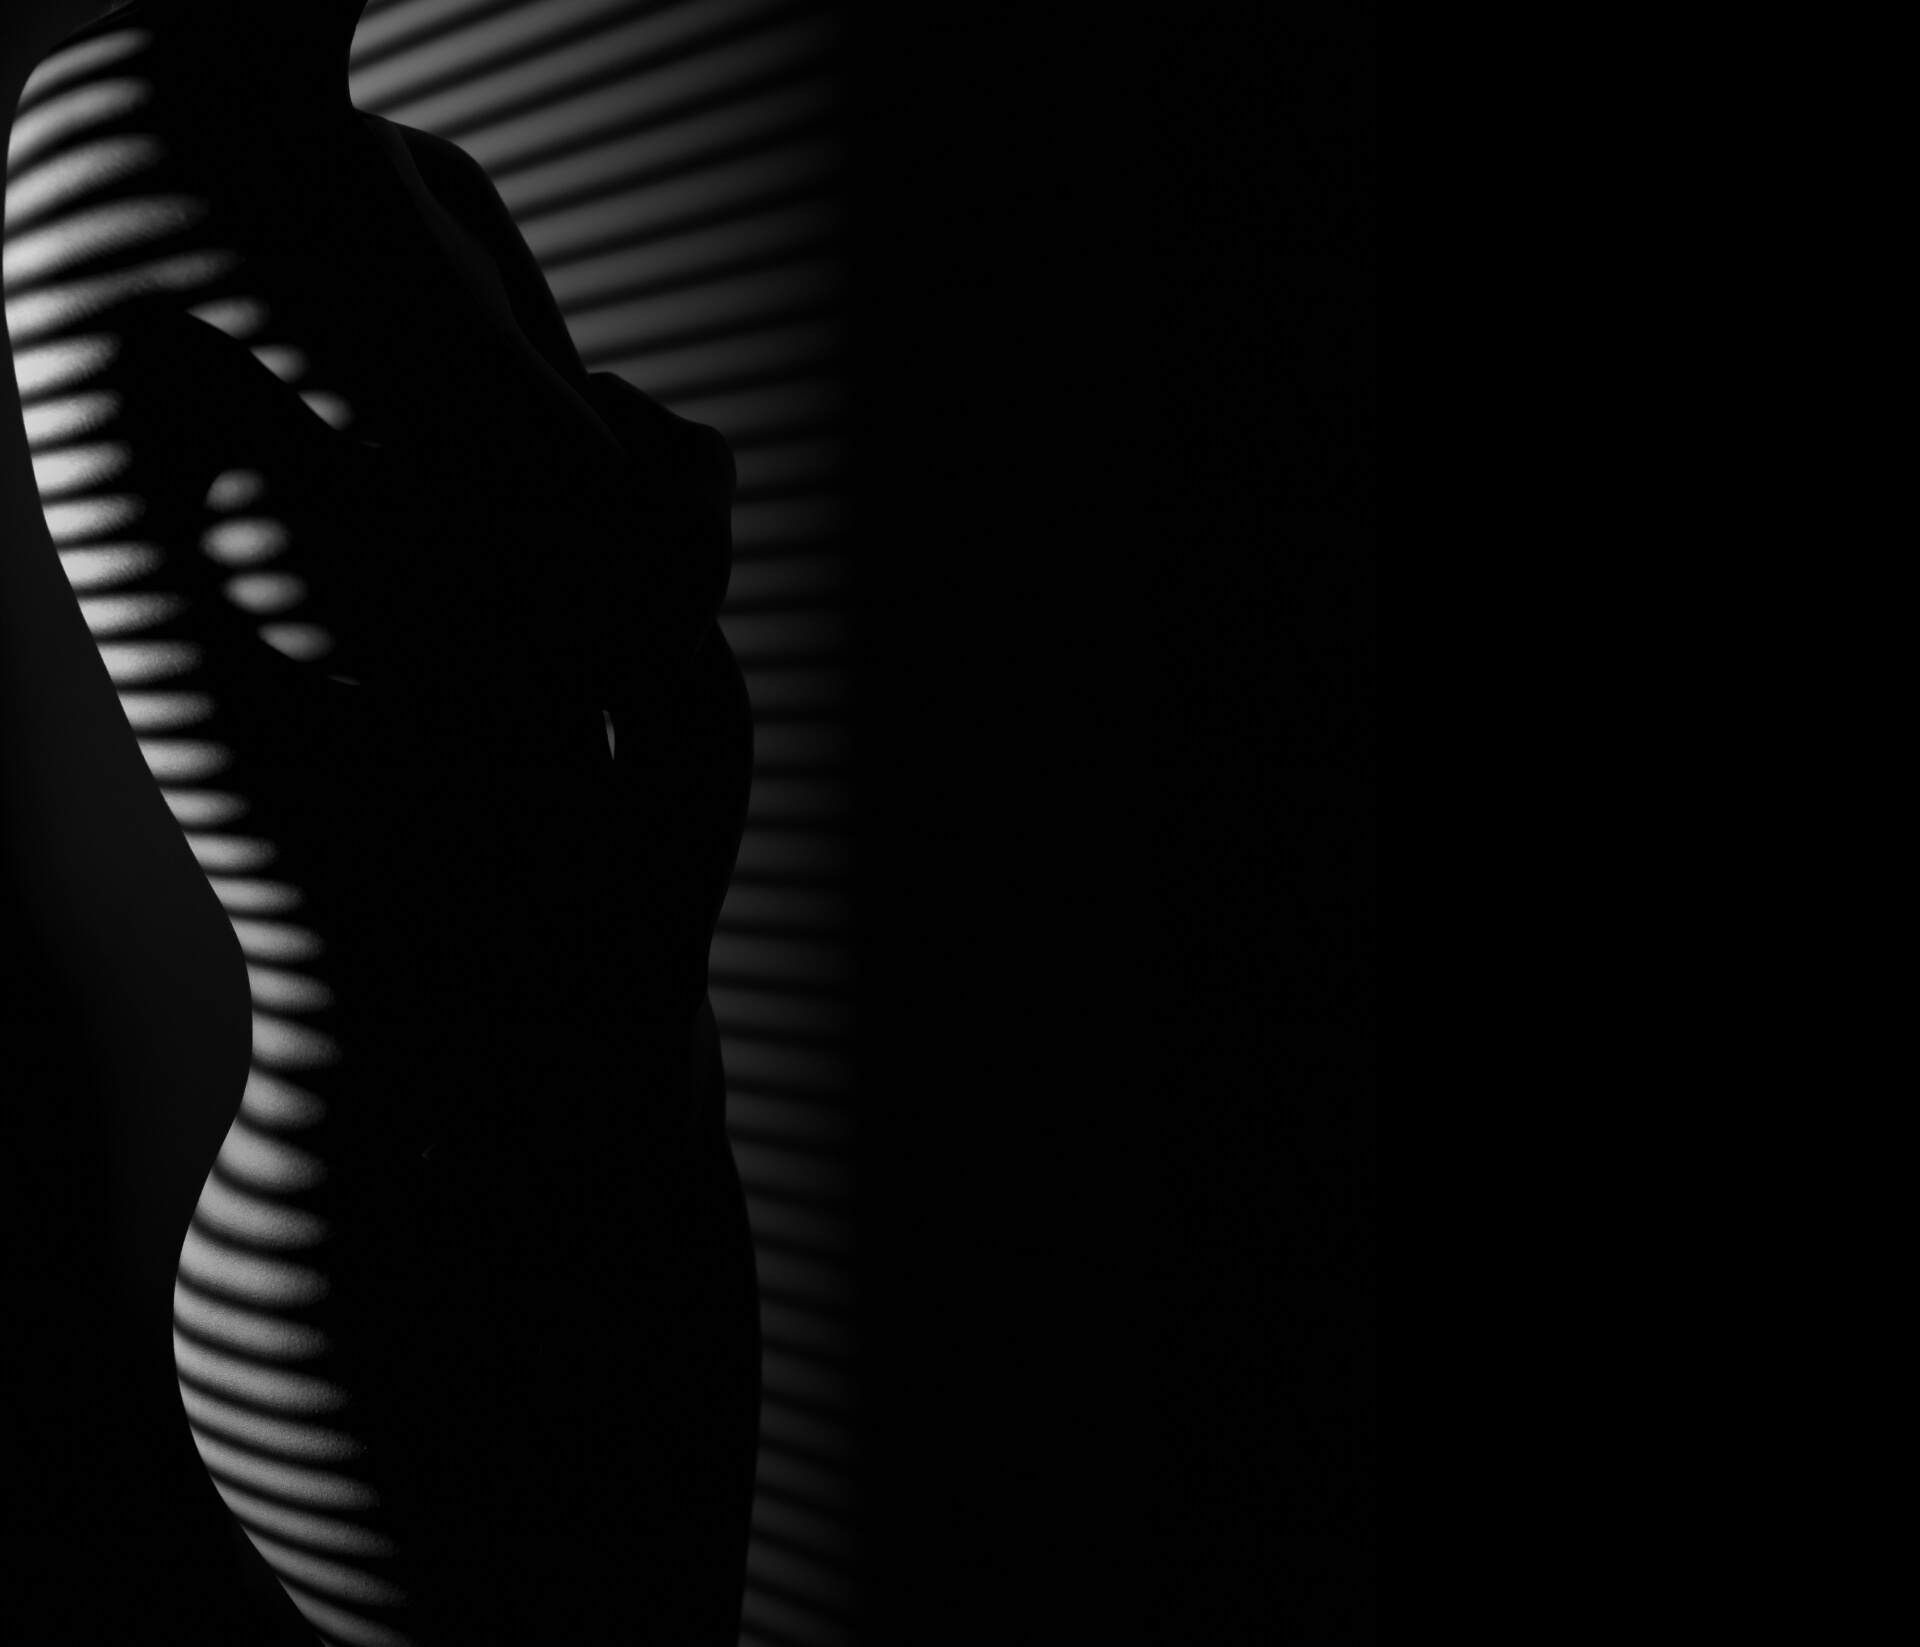 A silhouette of a woman standing in the shadow of a window.